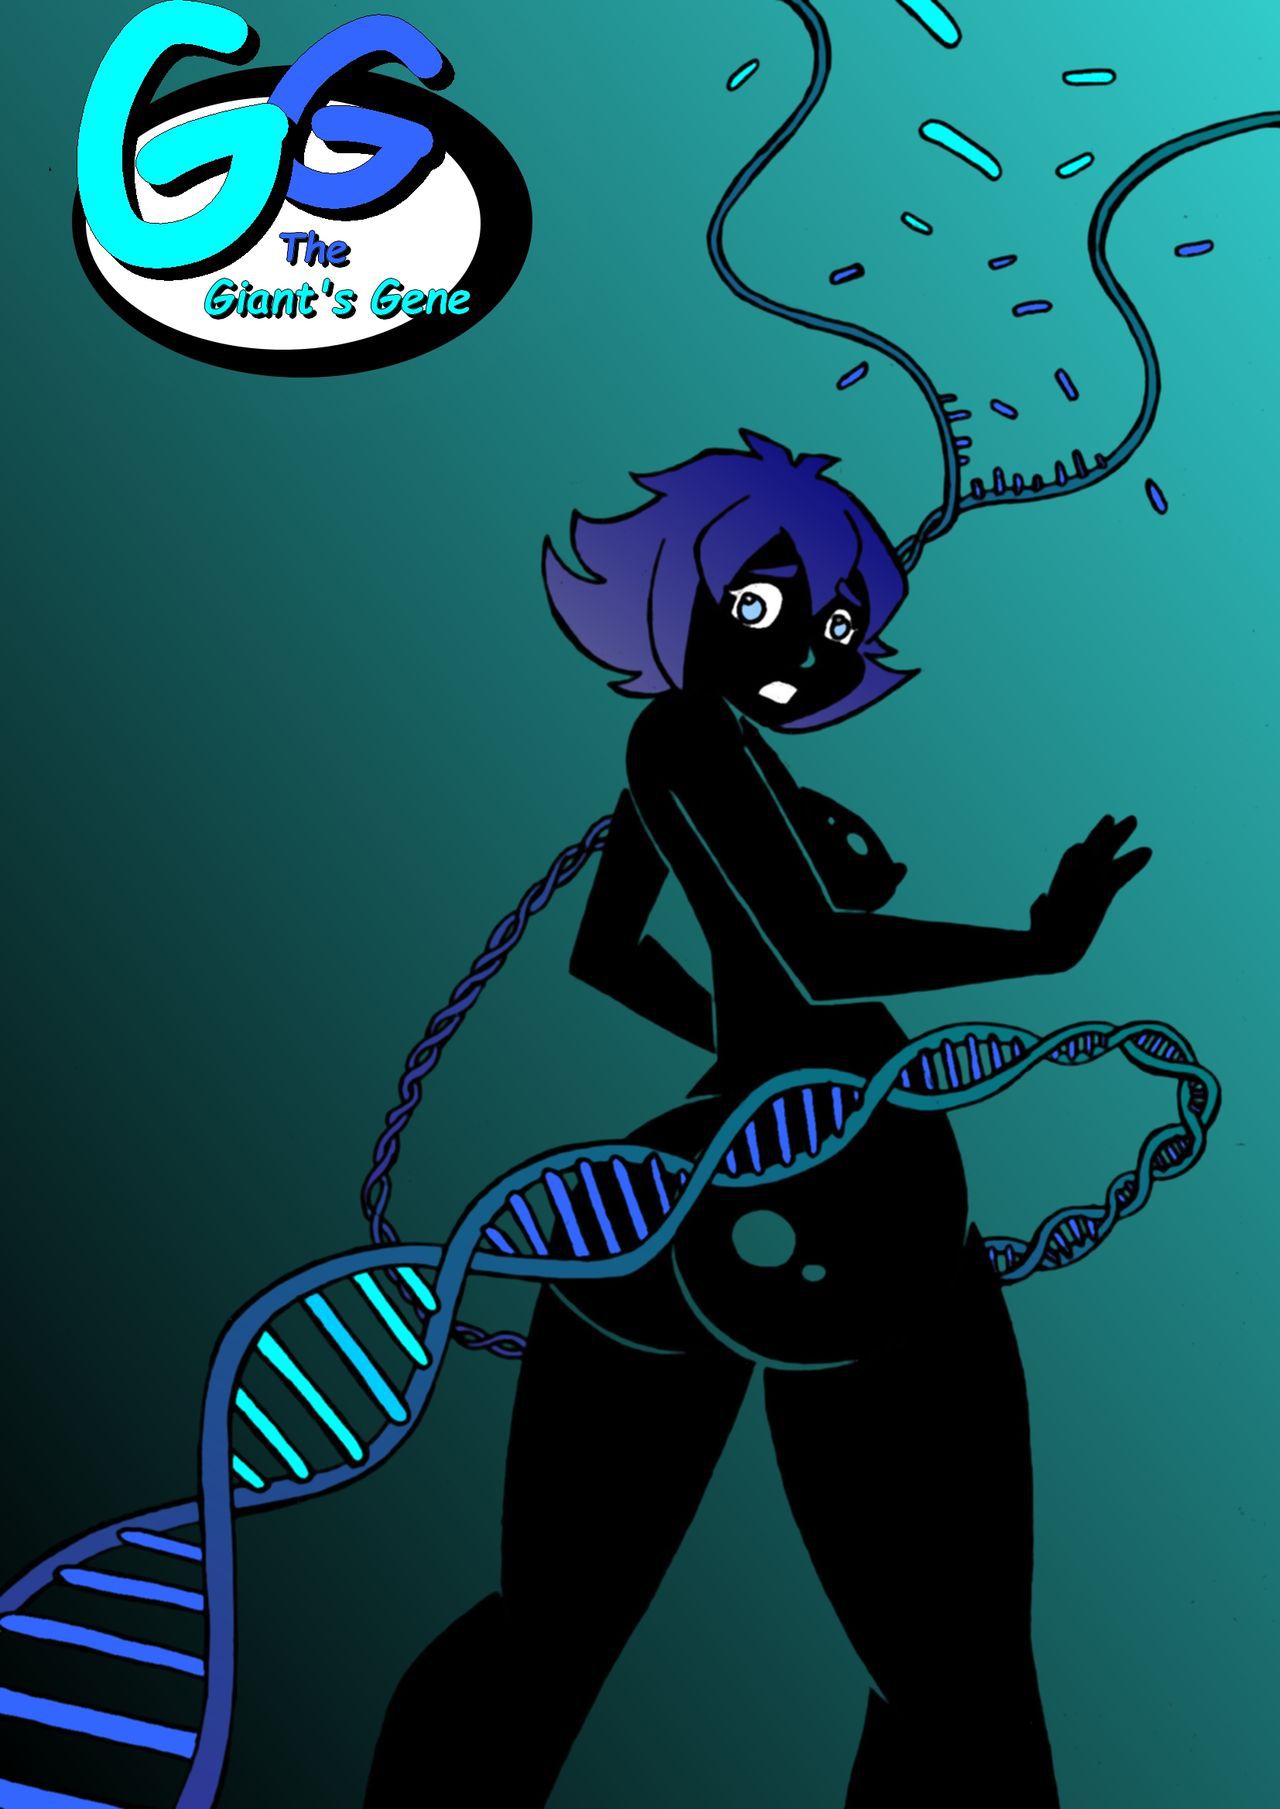 [DrSGrowth] GG: The Giant's Gene [Ongoing] 1